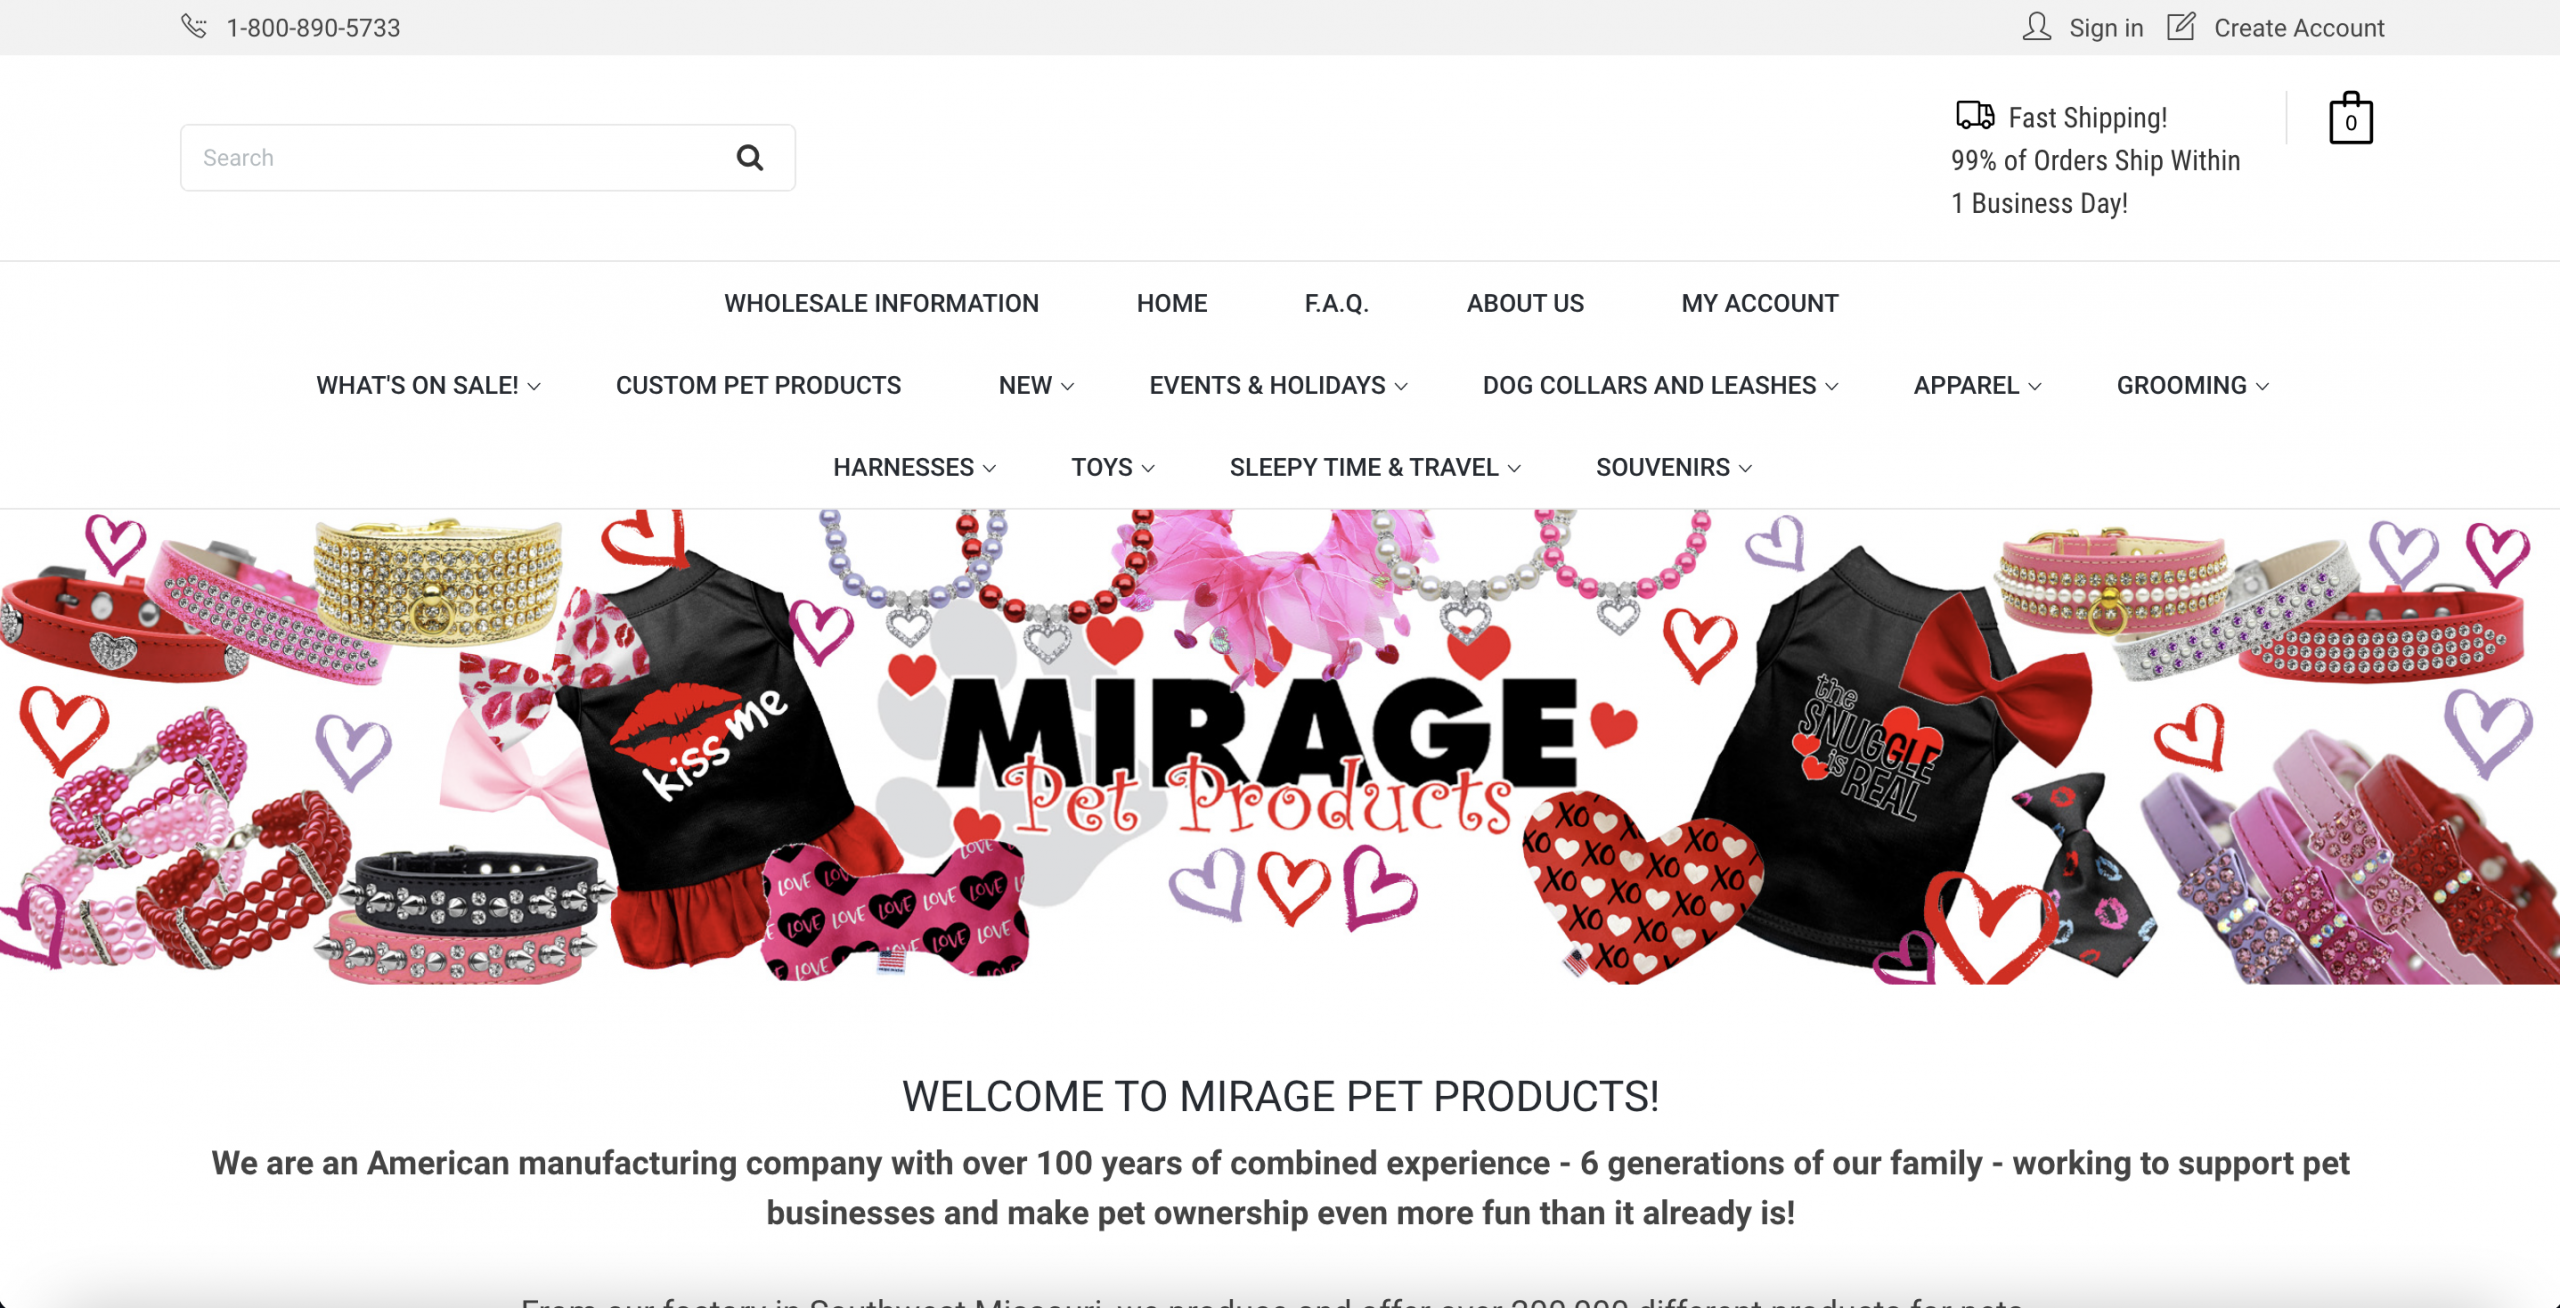 Mirage-pet-products